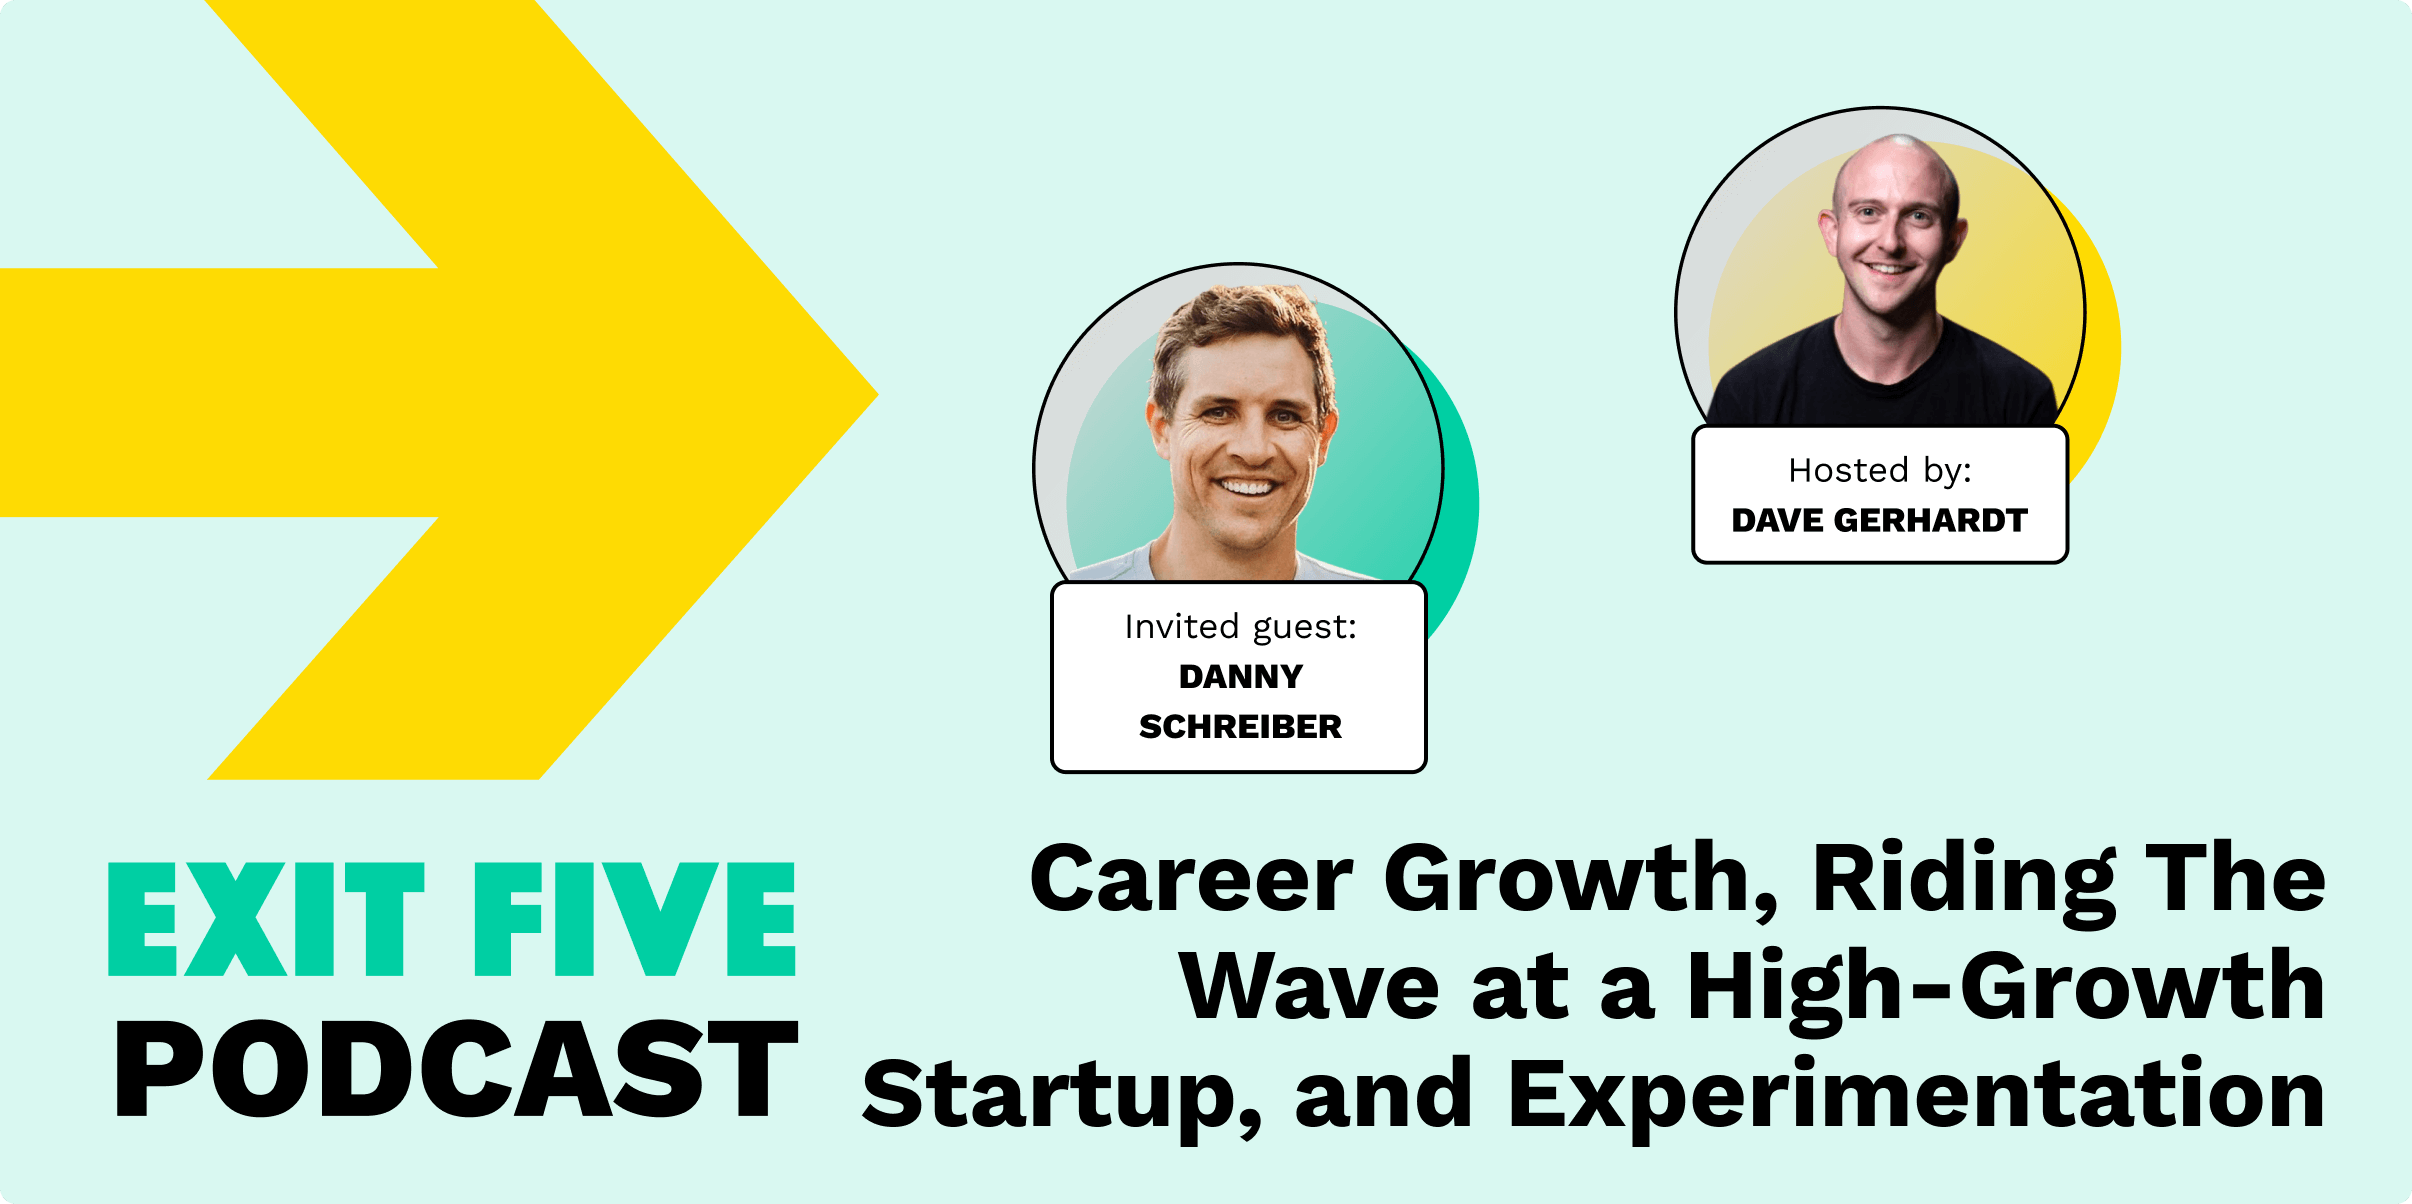 #90: Career Growth, Riding The Wave at a High-Growth Startup, Marketing Experiments and more with Danny Schreiber (Sr. Biz Ops Manager at Zapier)